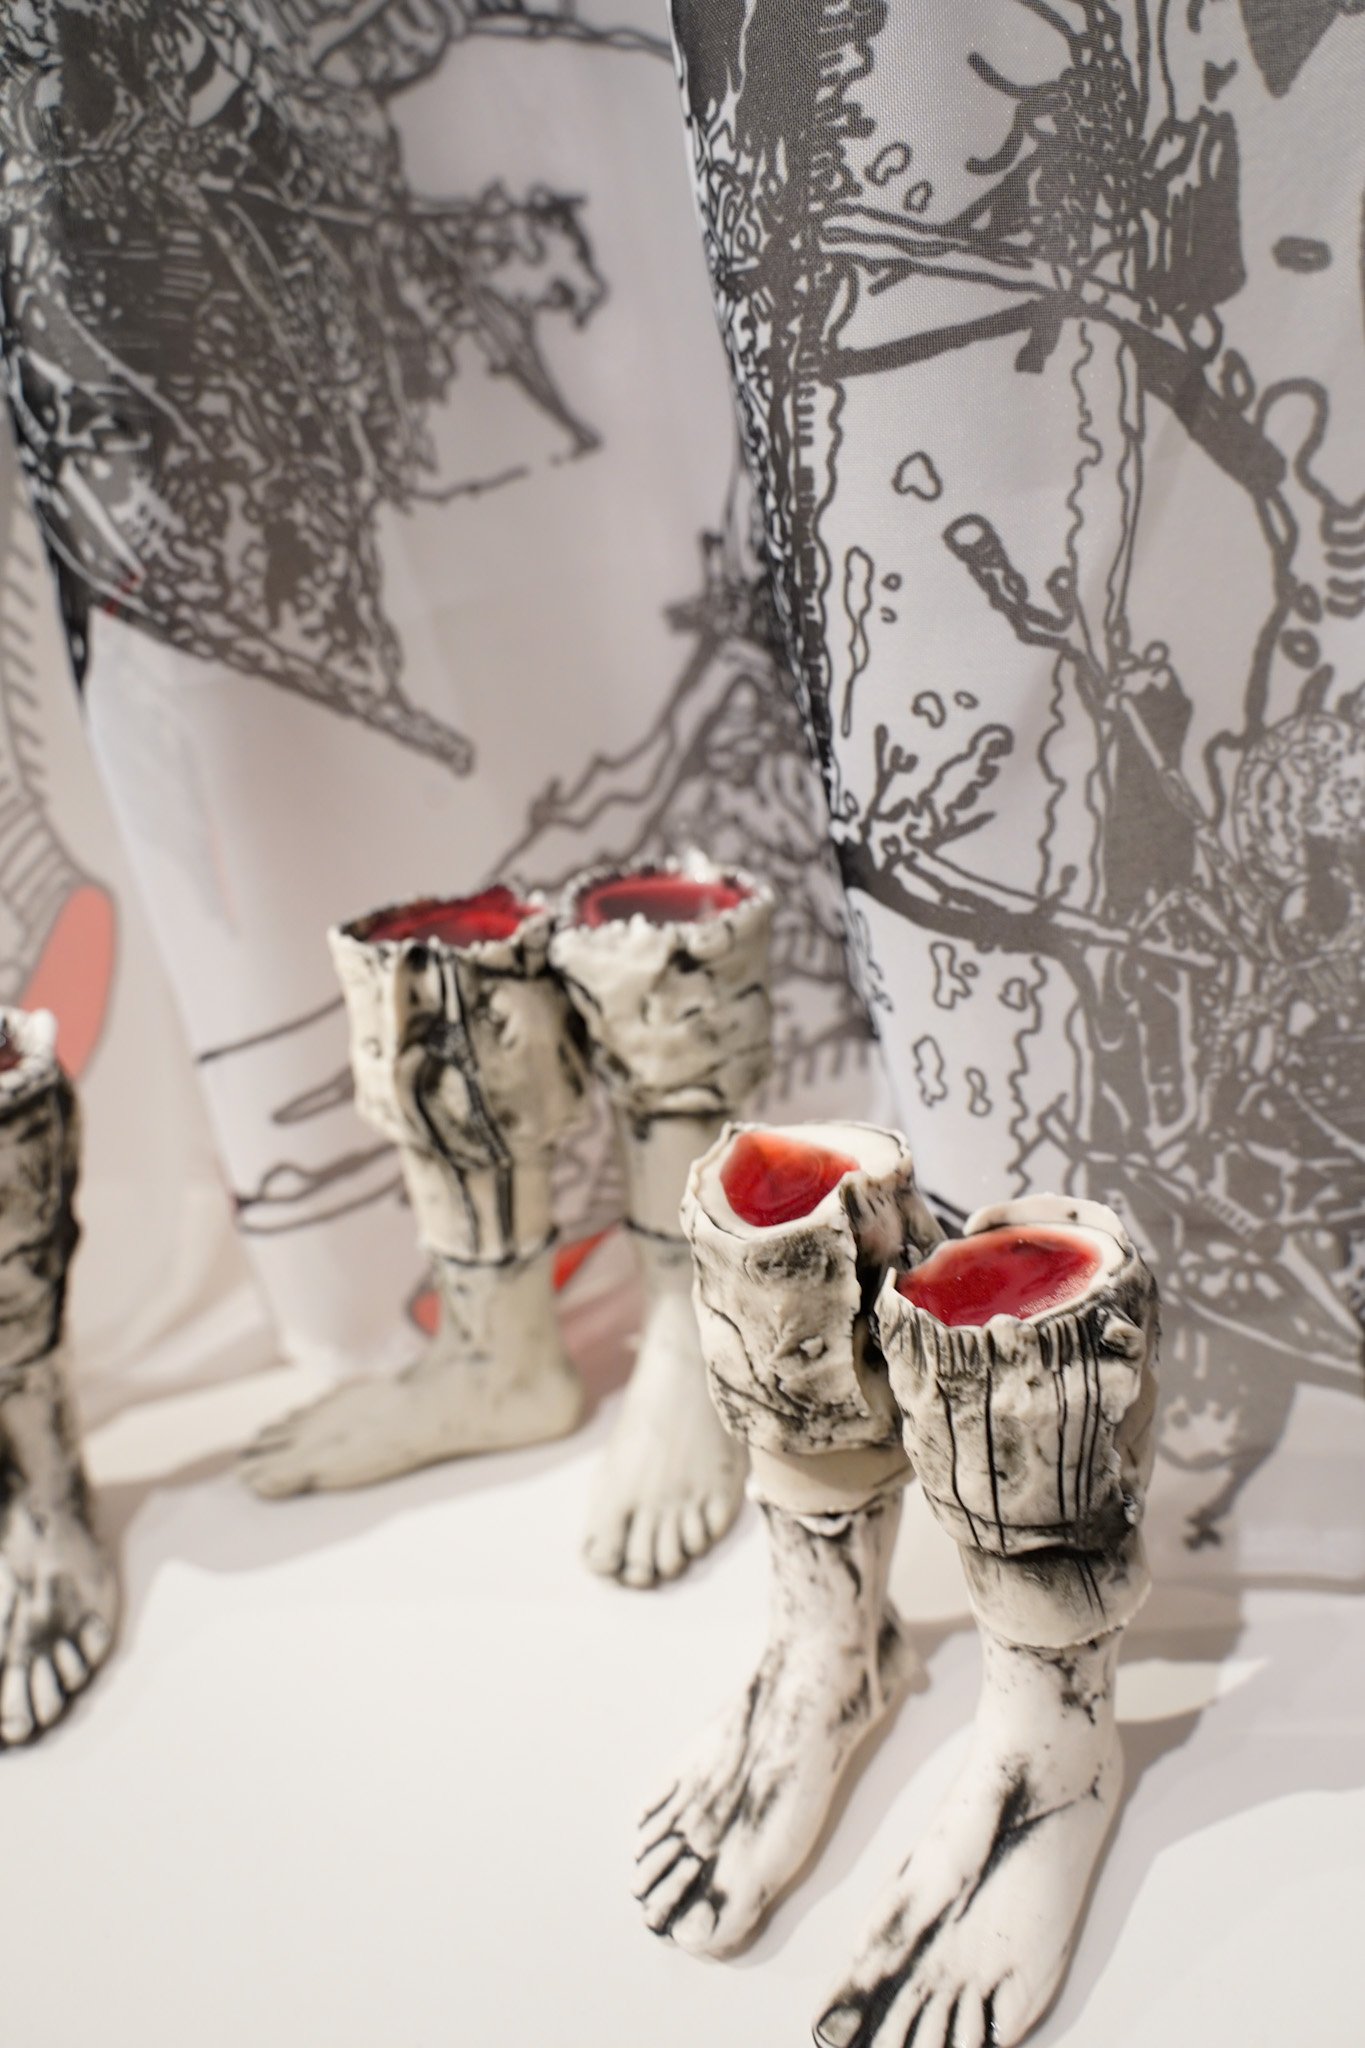 Candace Garlock_Citizens of that Other Space_Ceramic and Digital Print on Fabric_Installation 4 Detail.jpg